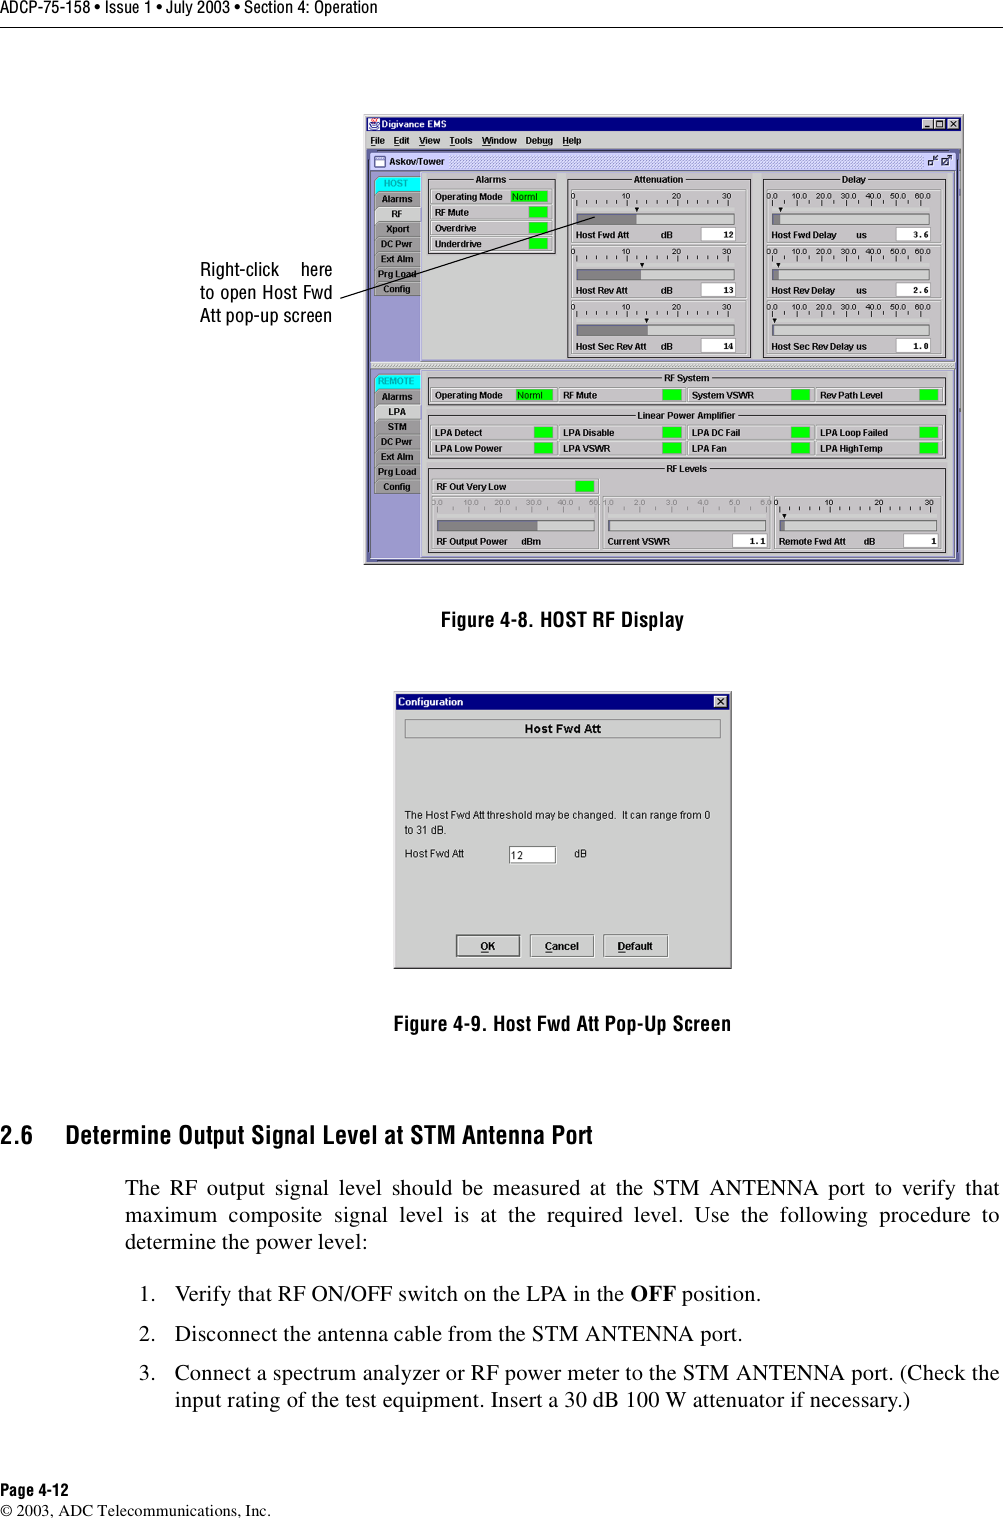 ADCP-75-158 • Issue 1 • July 2003 • Section 4: OperationPage 4-12© 2003, ADC Telecommunications, Inc.Figure 4-8. HOST RF DisplayFigure 4-9. Host Fwd Att Pop-Up Screen2.6 Determine Output Signal Level at STM Antenna PortThe RF output signal level should be measured at the STM ANTENNA port to verify thatmaximum composite signal level is at the required level. Use the following procedure todetermine the power level:1. Verify that RF ON/OFF switch on the LPA in the OFF position. 2. Disconnect the antenna cable from the STM ANTENNA port. 3. Connect a spectrum analyzer or RF power meter to the STM ANTENNA port. (Check theinput rating of the test equipment. Insert a 30 dB 100 W attenuator if necessary.) Right-click hereto open Host FwdAtt pop-up screen